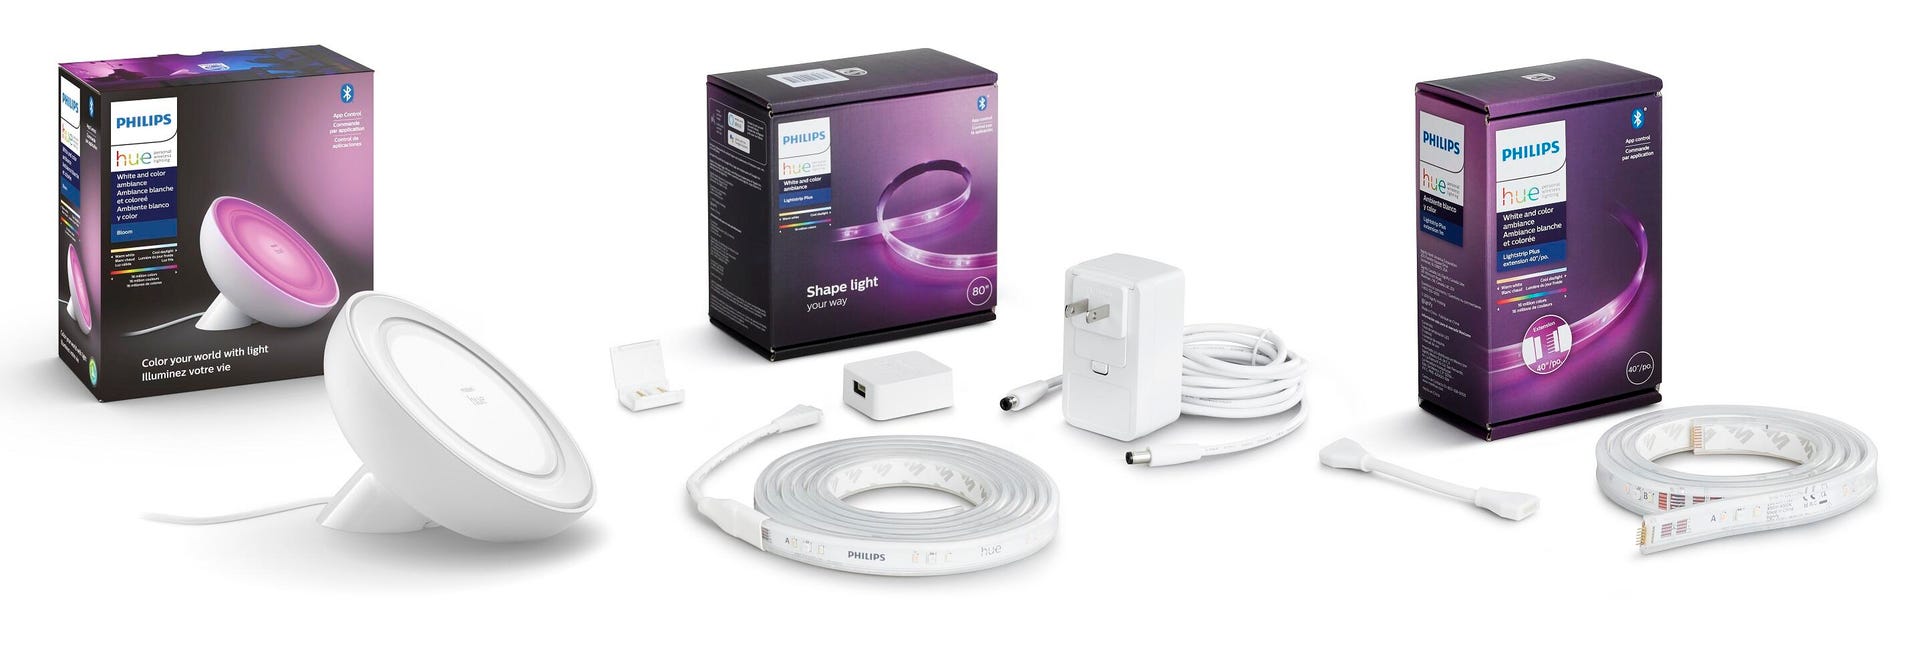 philips-hue-bloom-and-lightstrips-bluetooth-2020